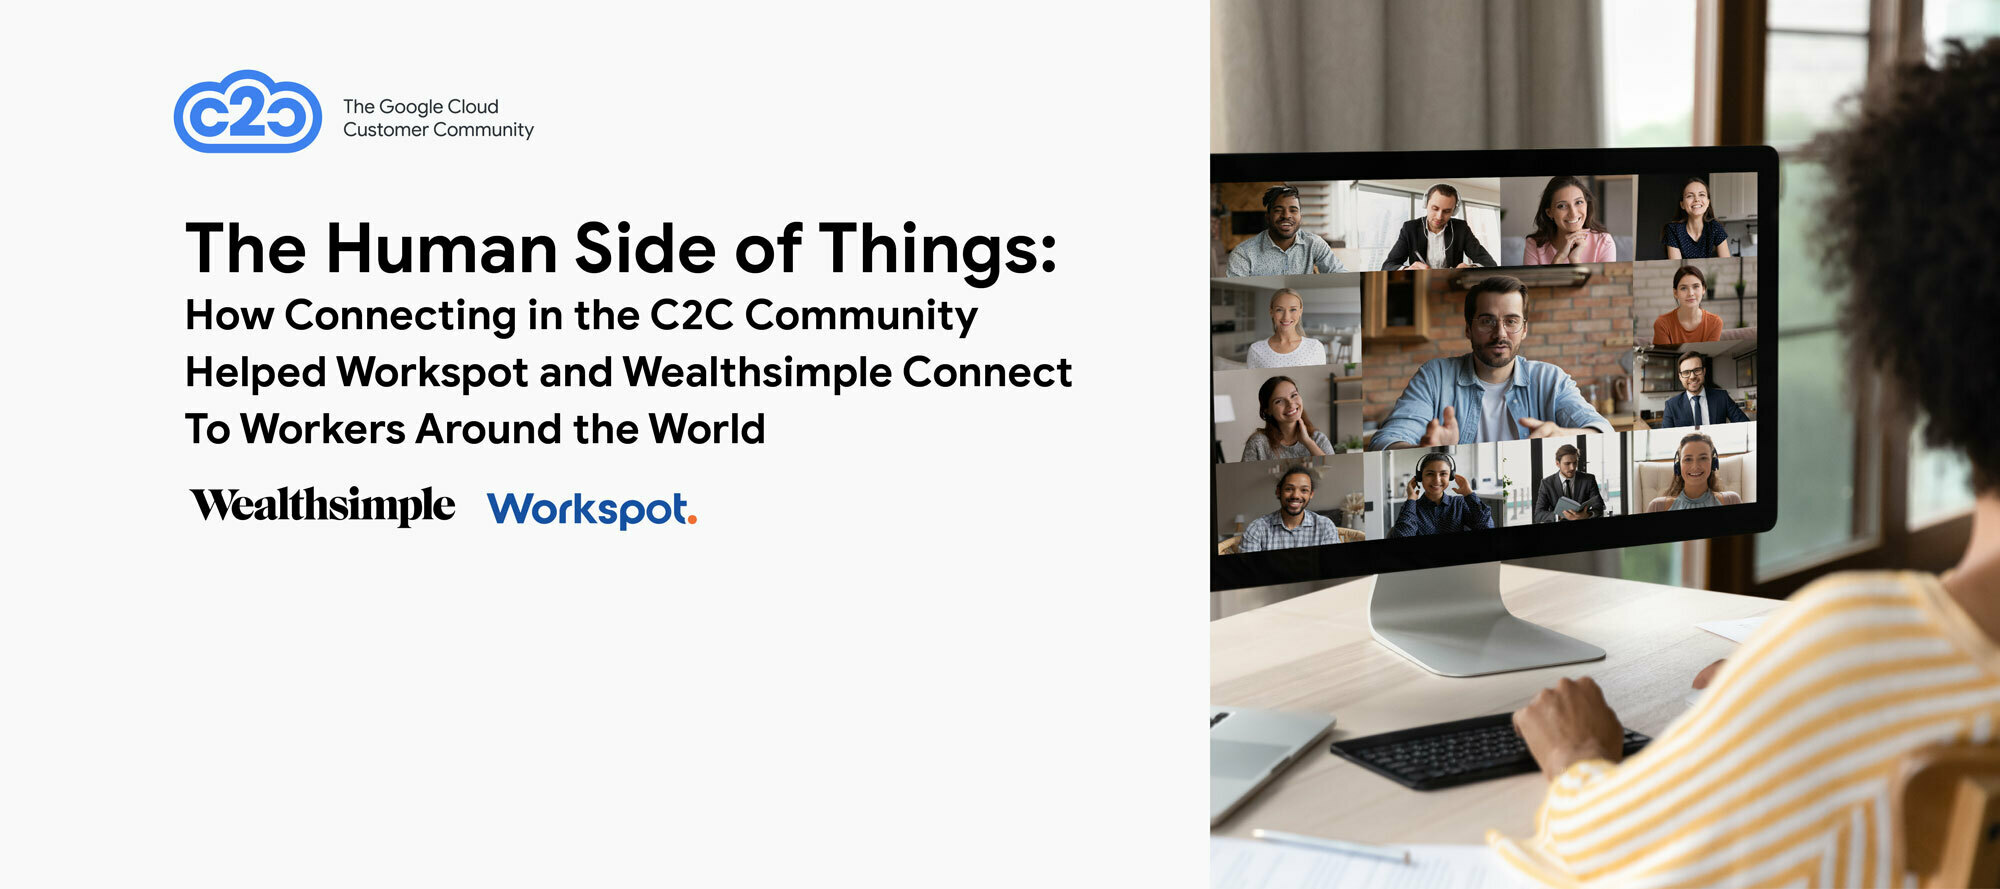 The Human Side of Things: How Connecting in the C2C Community Helped Workspot and Wealthsimple Connect To Workers Around the World